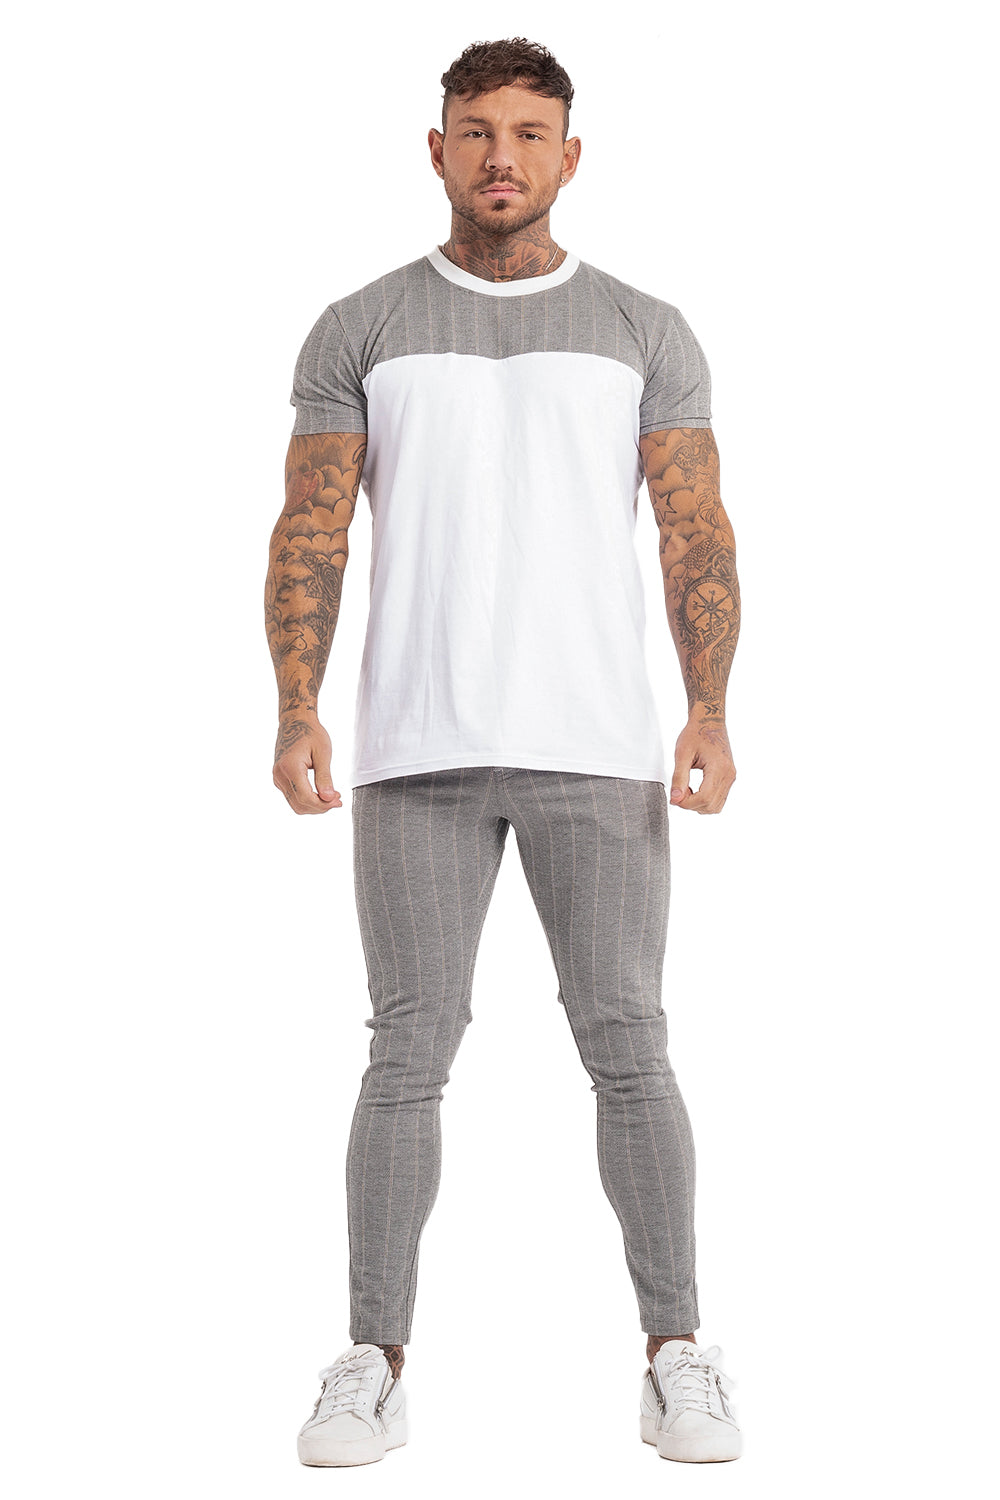 Men's spring casual sports suit